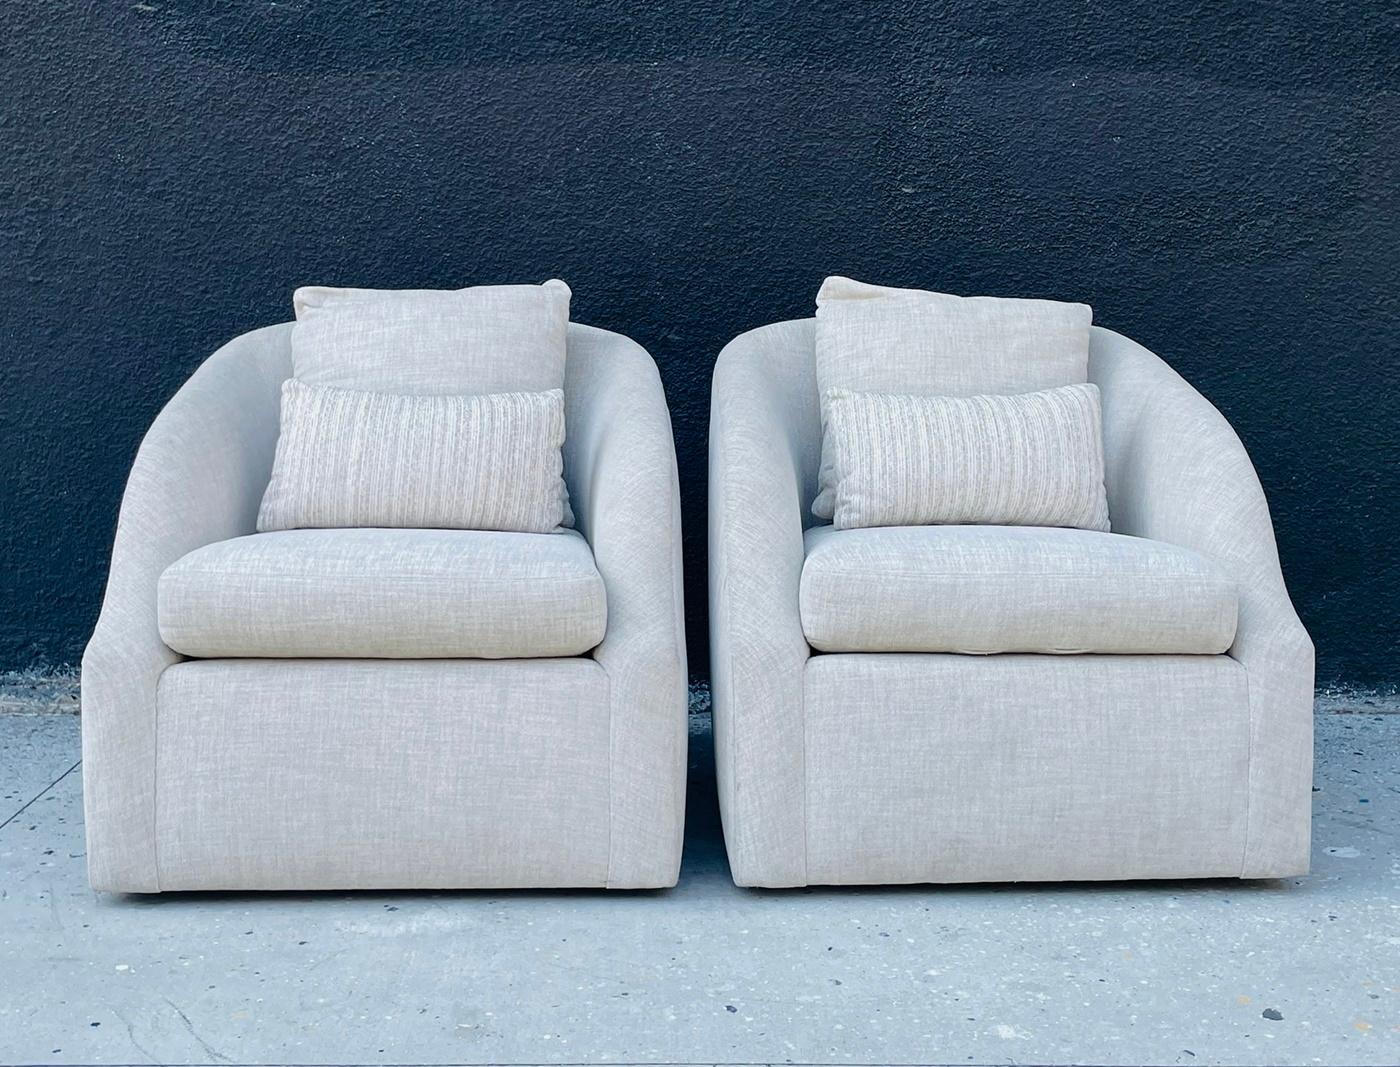 Add a touch of modern sophistication to your living space with this exquisite Pair of Post Modern Armchairs with a Swivel Base, crafted in the USA in the 1990's. These sleek and stylish chairs feature a unique design with a swivel base for added